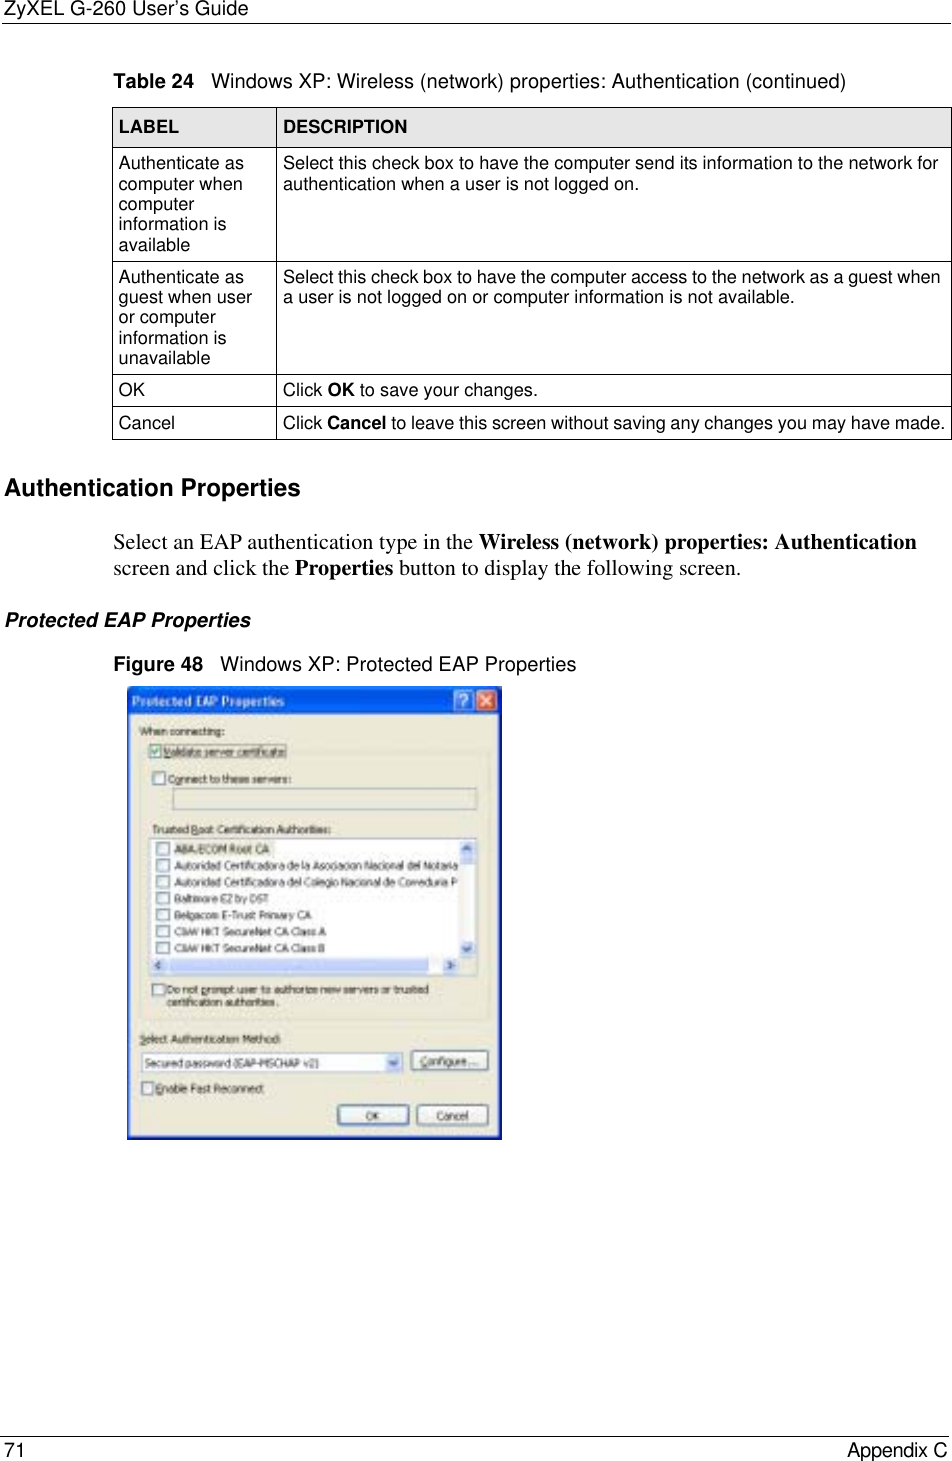 ZyXEL G-260 User’s Guide71 Appendix CAuthentication PropertiesSelect an EAP authentication type in the Wireless (network) properties: Authenticationscreen and click the Properties button to display the following screen. Protected EAP PropertiesFigure 48   Windows XP: Protected EAP PropertiesAuthenticate as computer when computer information is availableSelect this check box to have the computer send its information to the network for authentication when a user is not logged on.Authenticate as guest when user or computer information is unavailableSelect this check box to have the computer access to the network as a guest when a user is not logged on or computer information is not available.OK Click OK to save your changes.Cancel Click Cancel to leave this screen without saving any changes you may have made.Table 24   Windows XP: Wireless (network) properties: Authentication (continued)LABEL DESCRIPTION